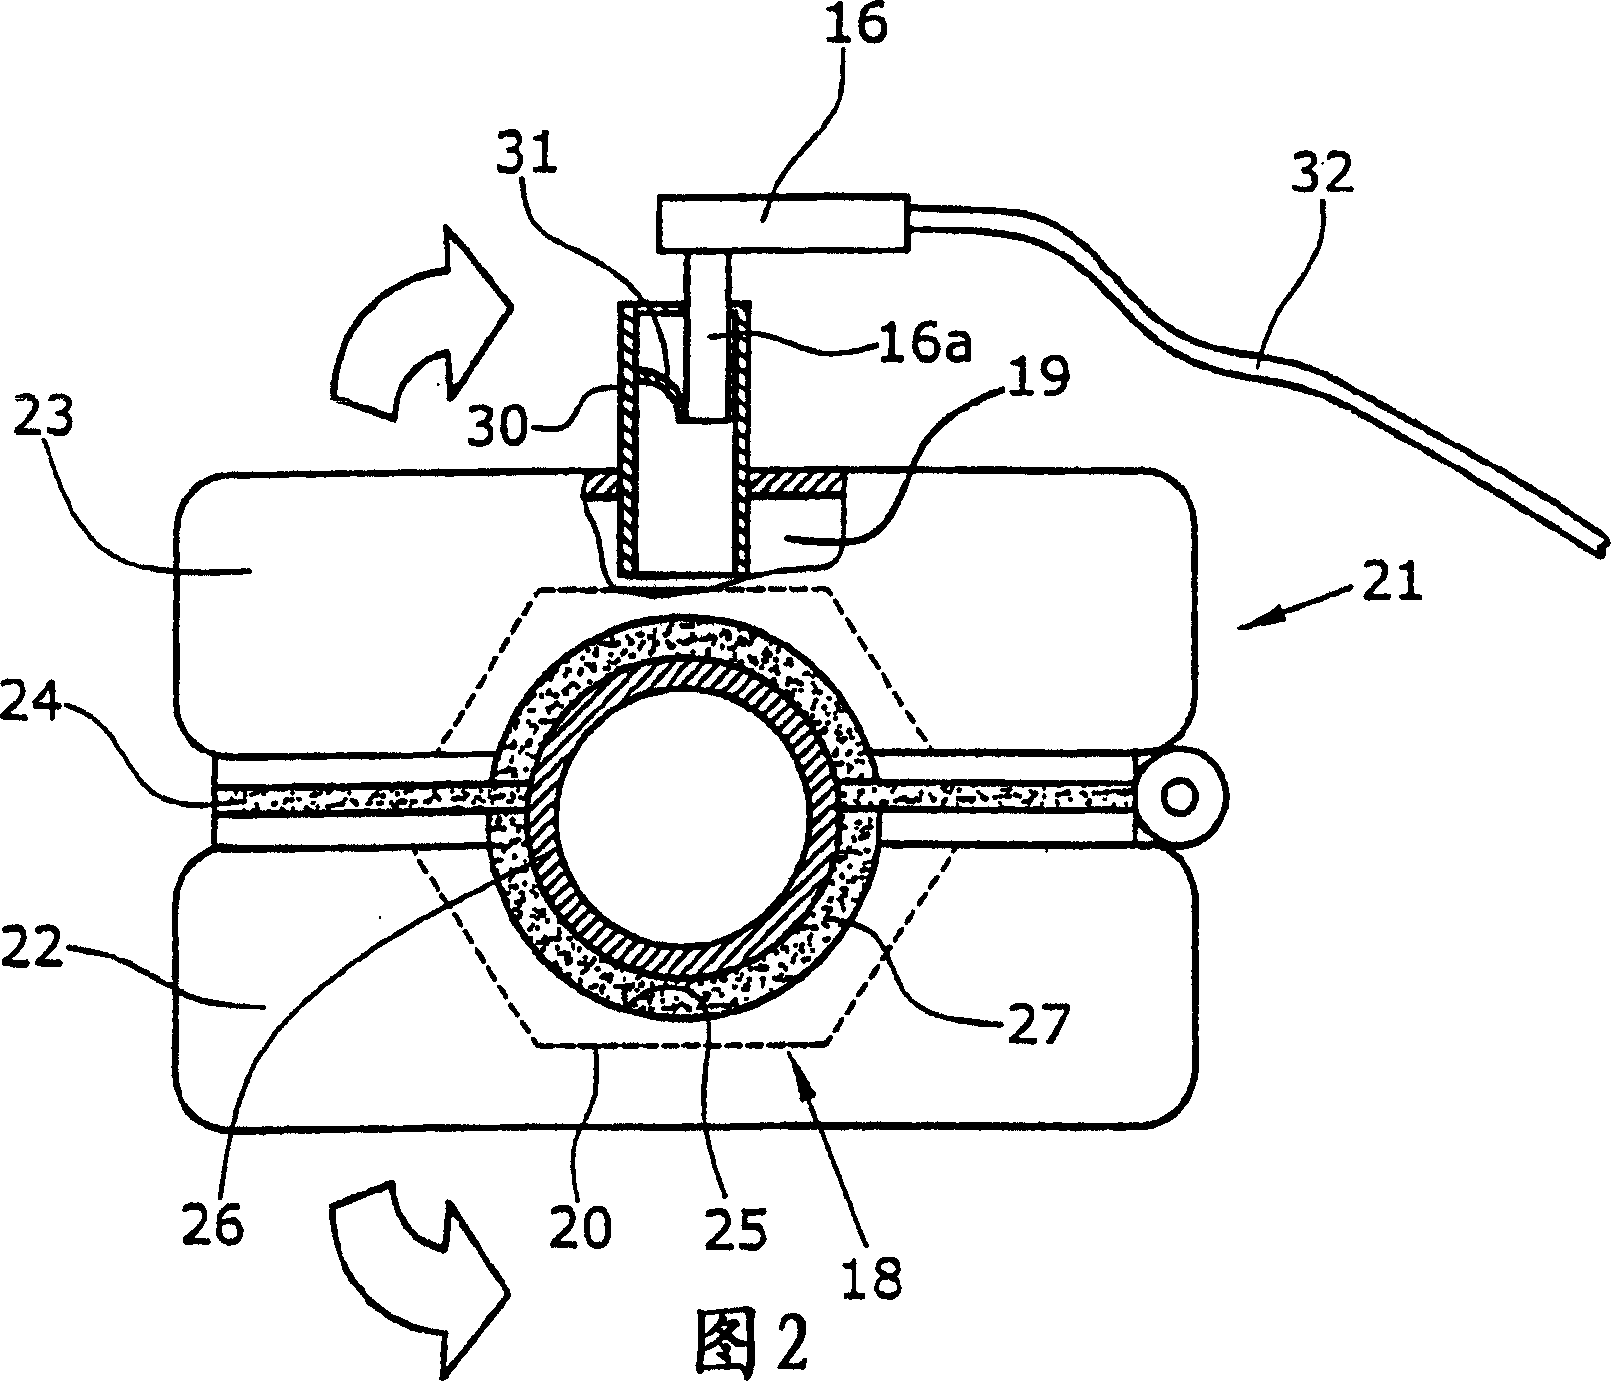 Method and device for recognizing leaks